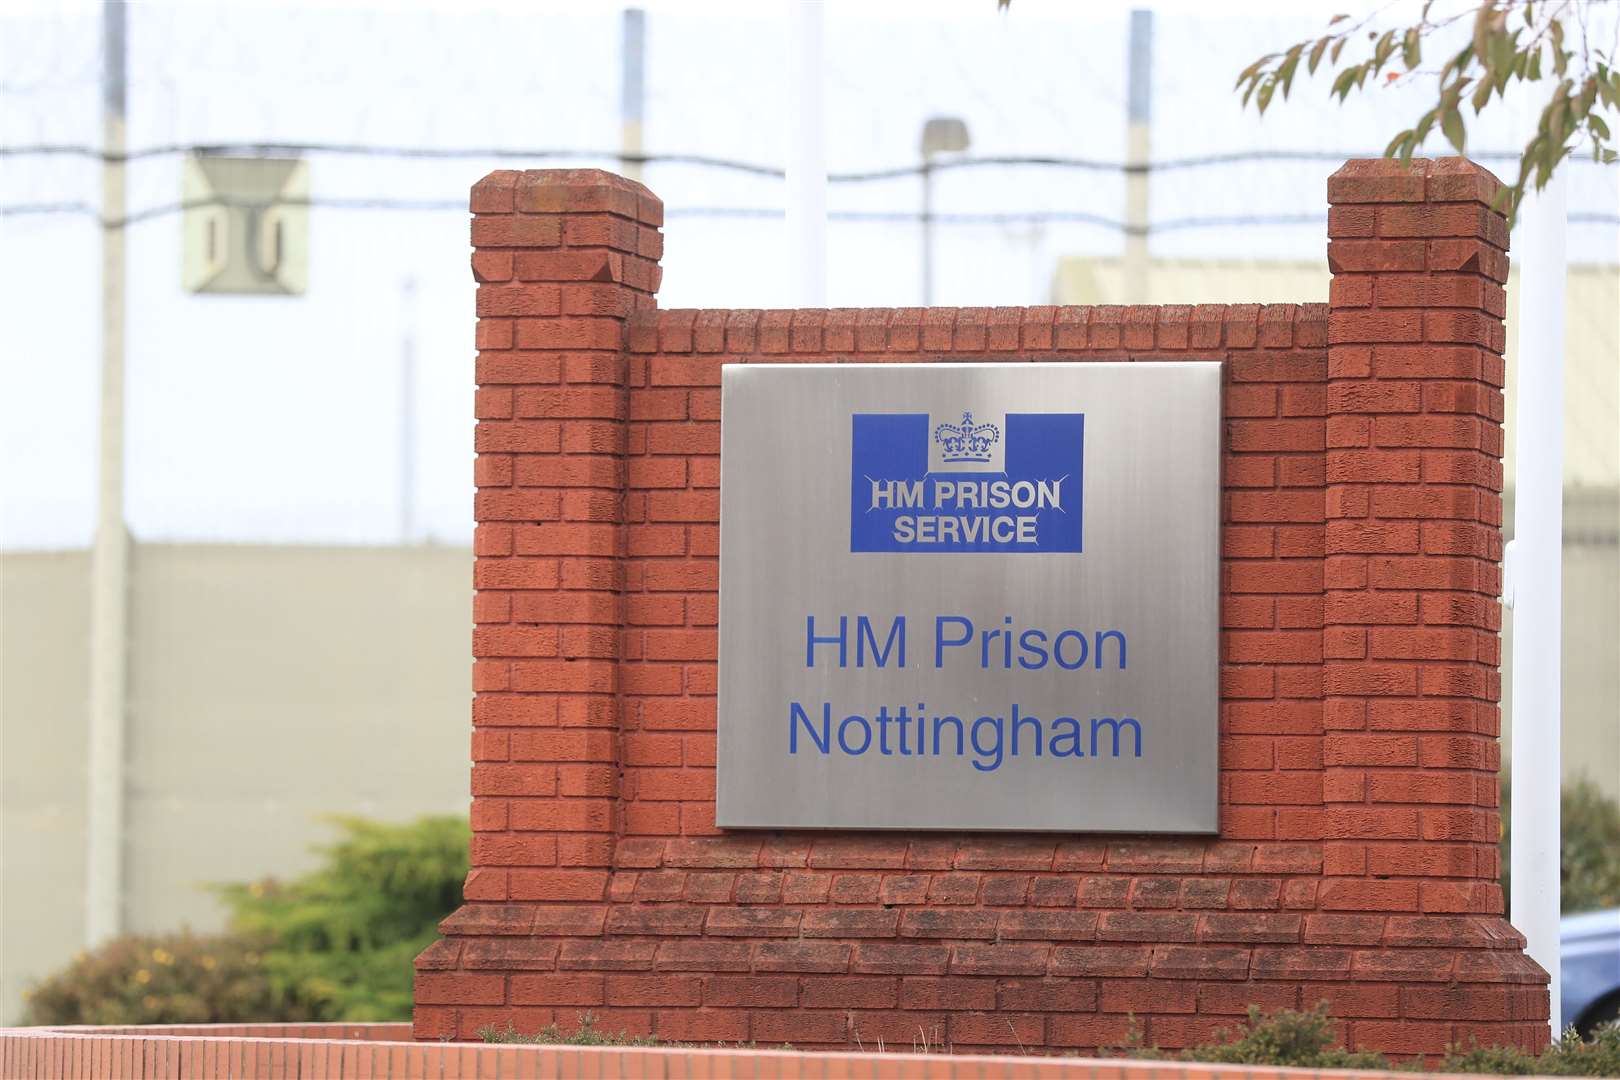 Nottingham, the first prison to receive a UN in January 2018, was rated as good (PA)